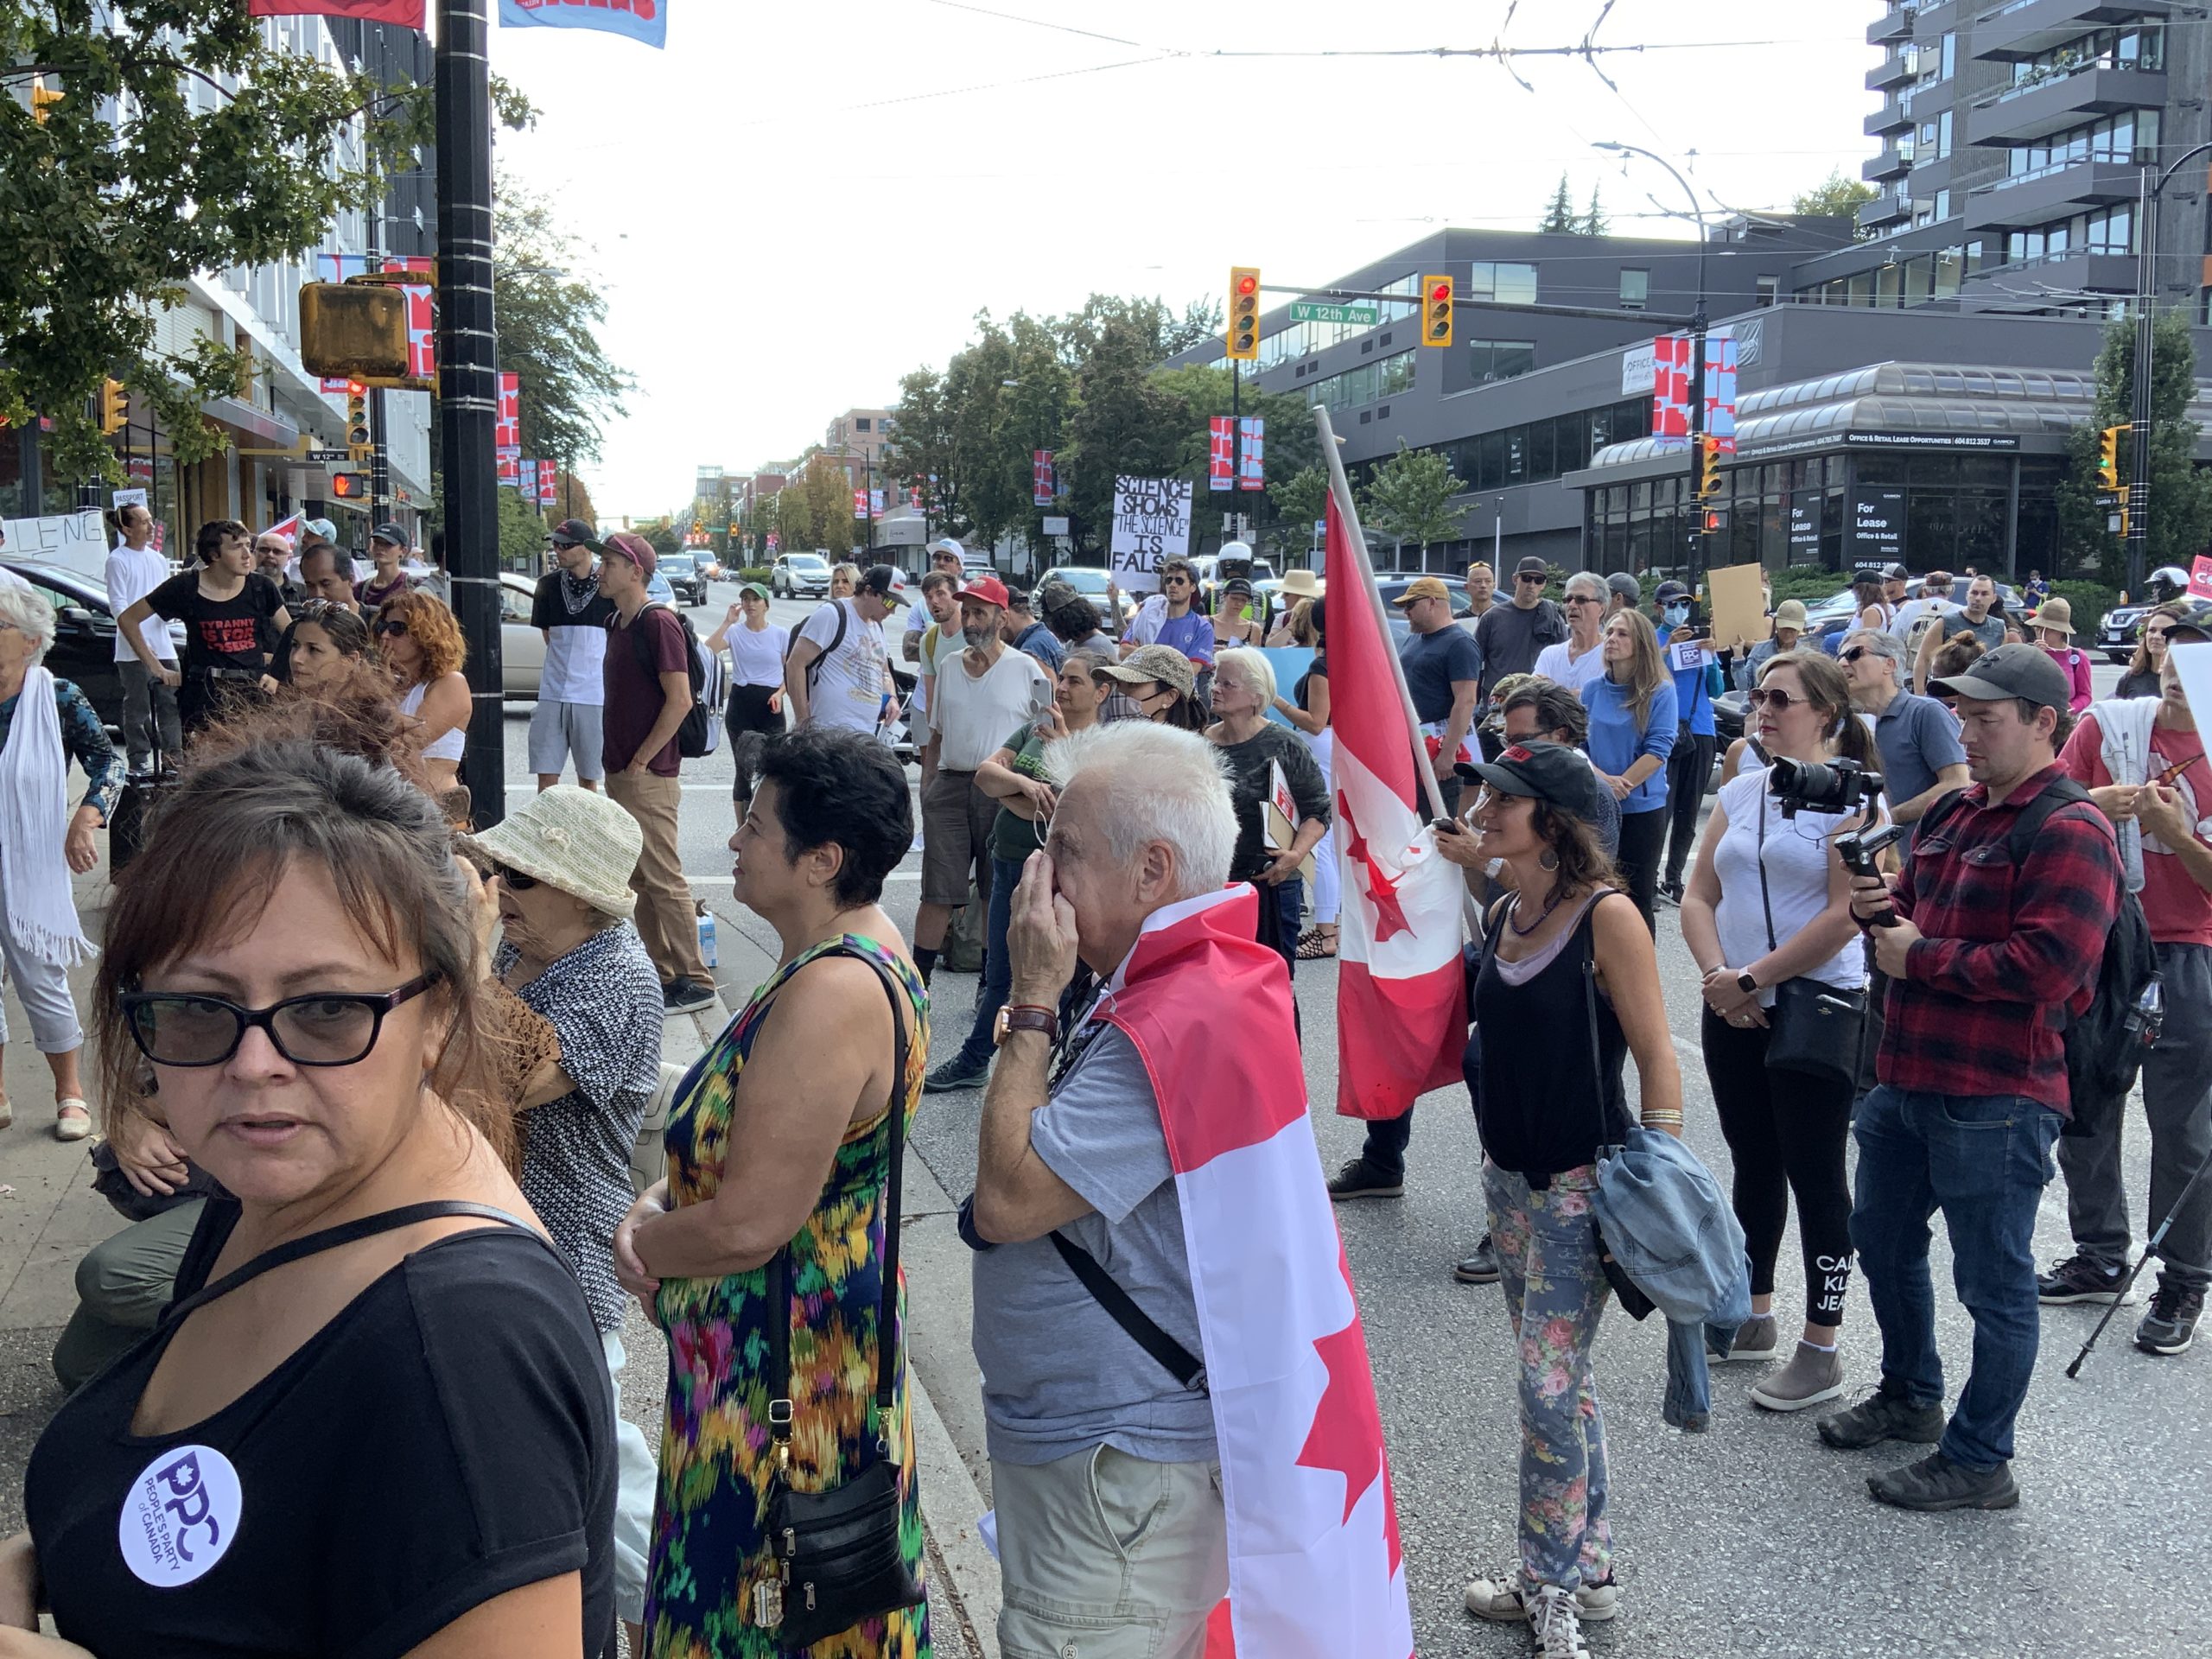 Vaccine passport protest disrupts traffic near Cambie Street in Vancouver